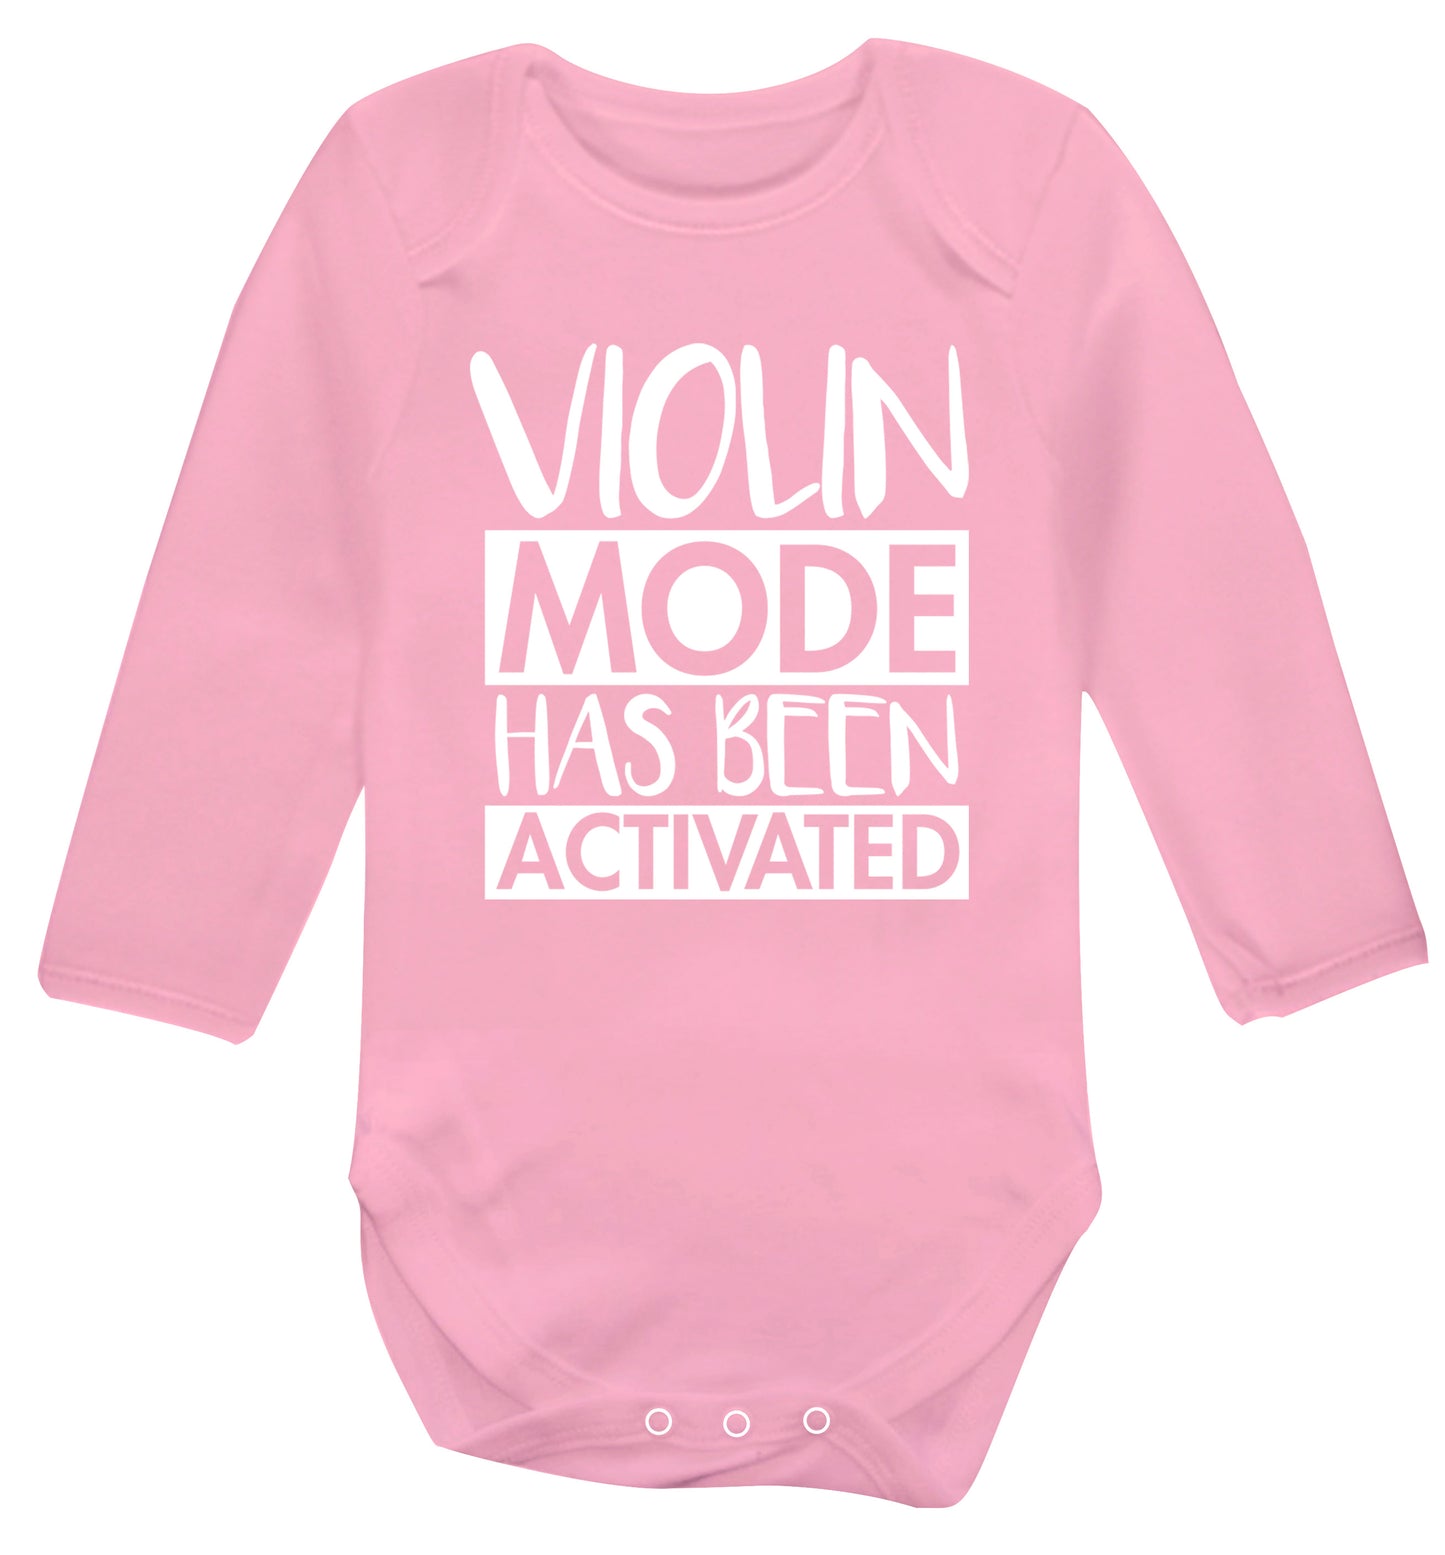 Violin Mode Activated Baby Vest long sleeved pale pink 6-12 months